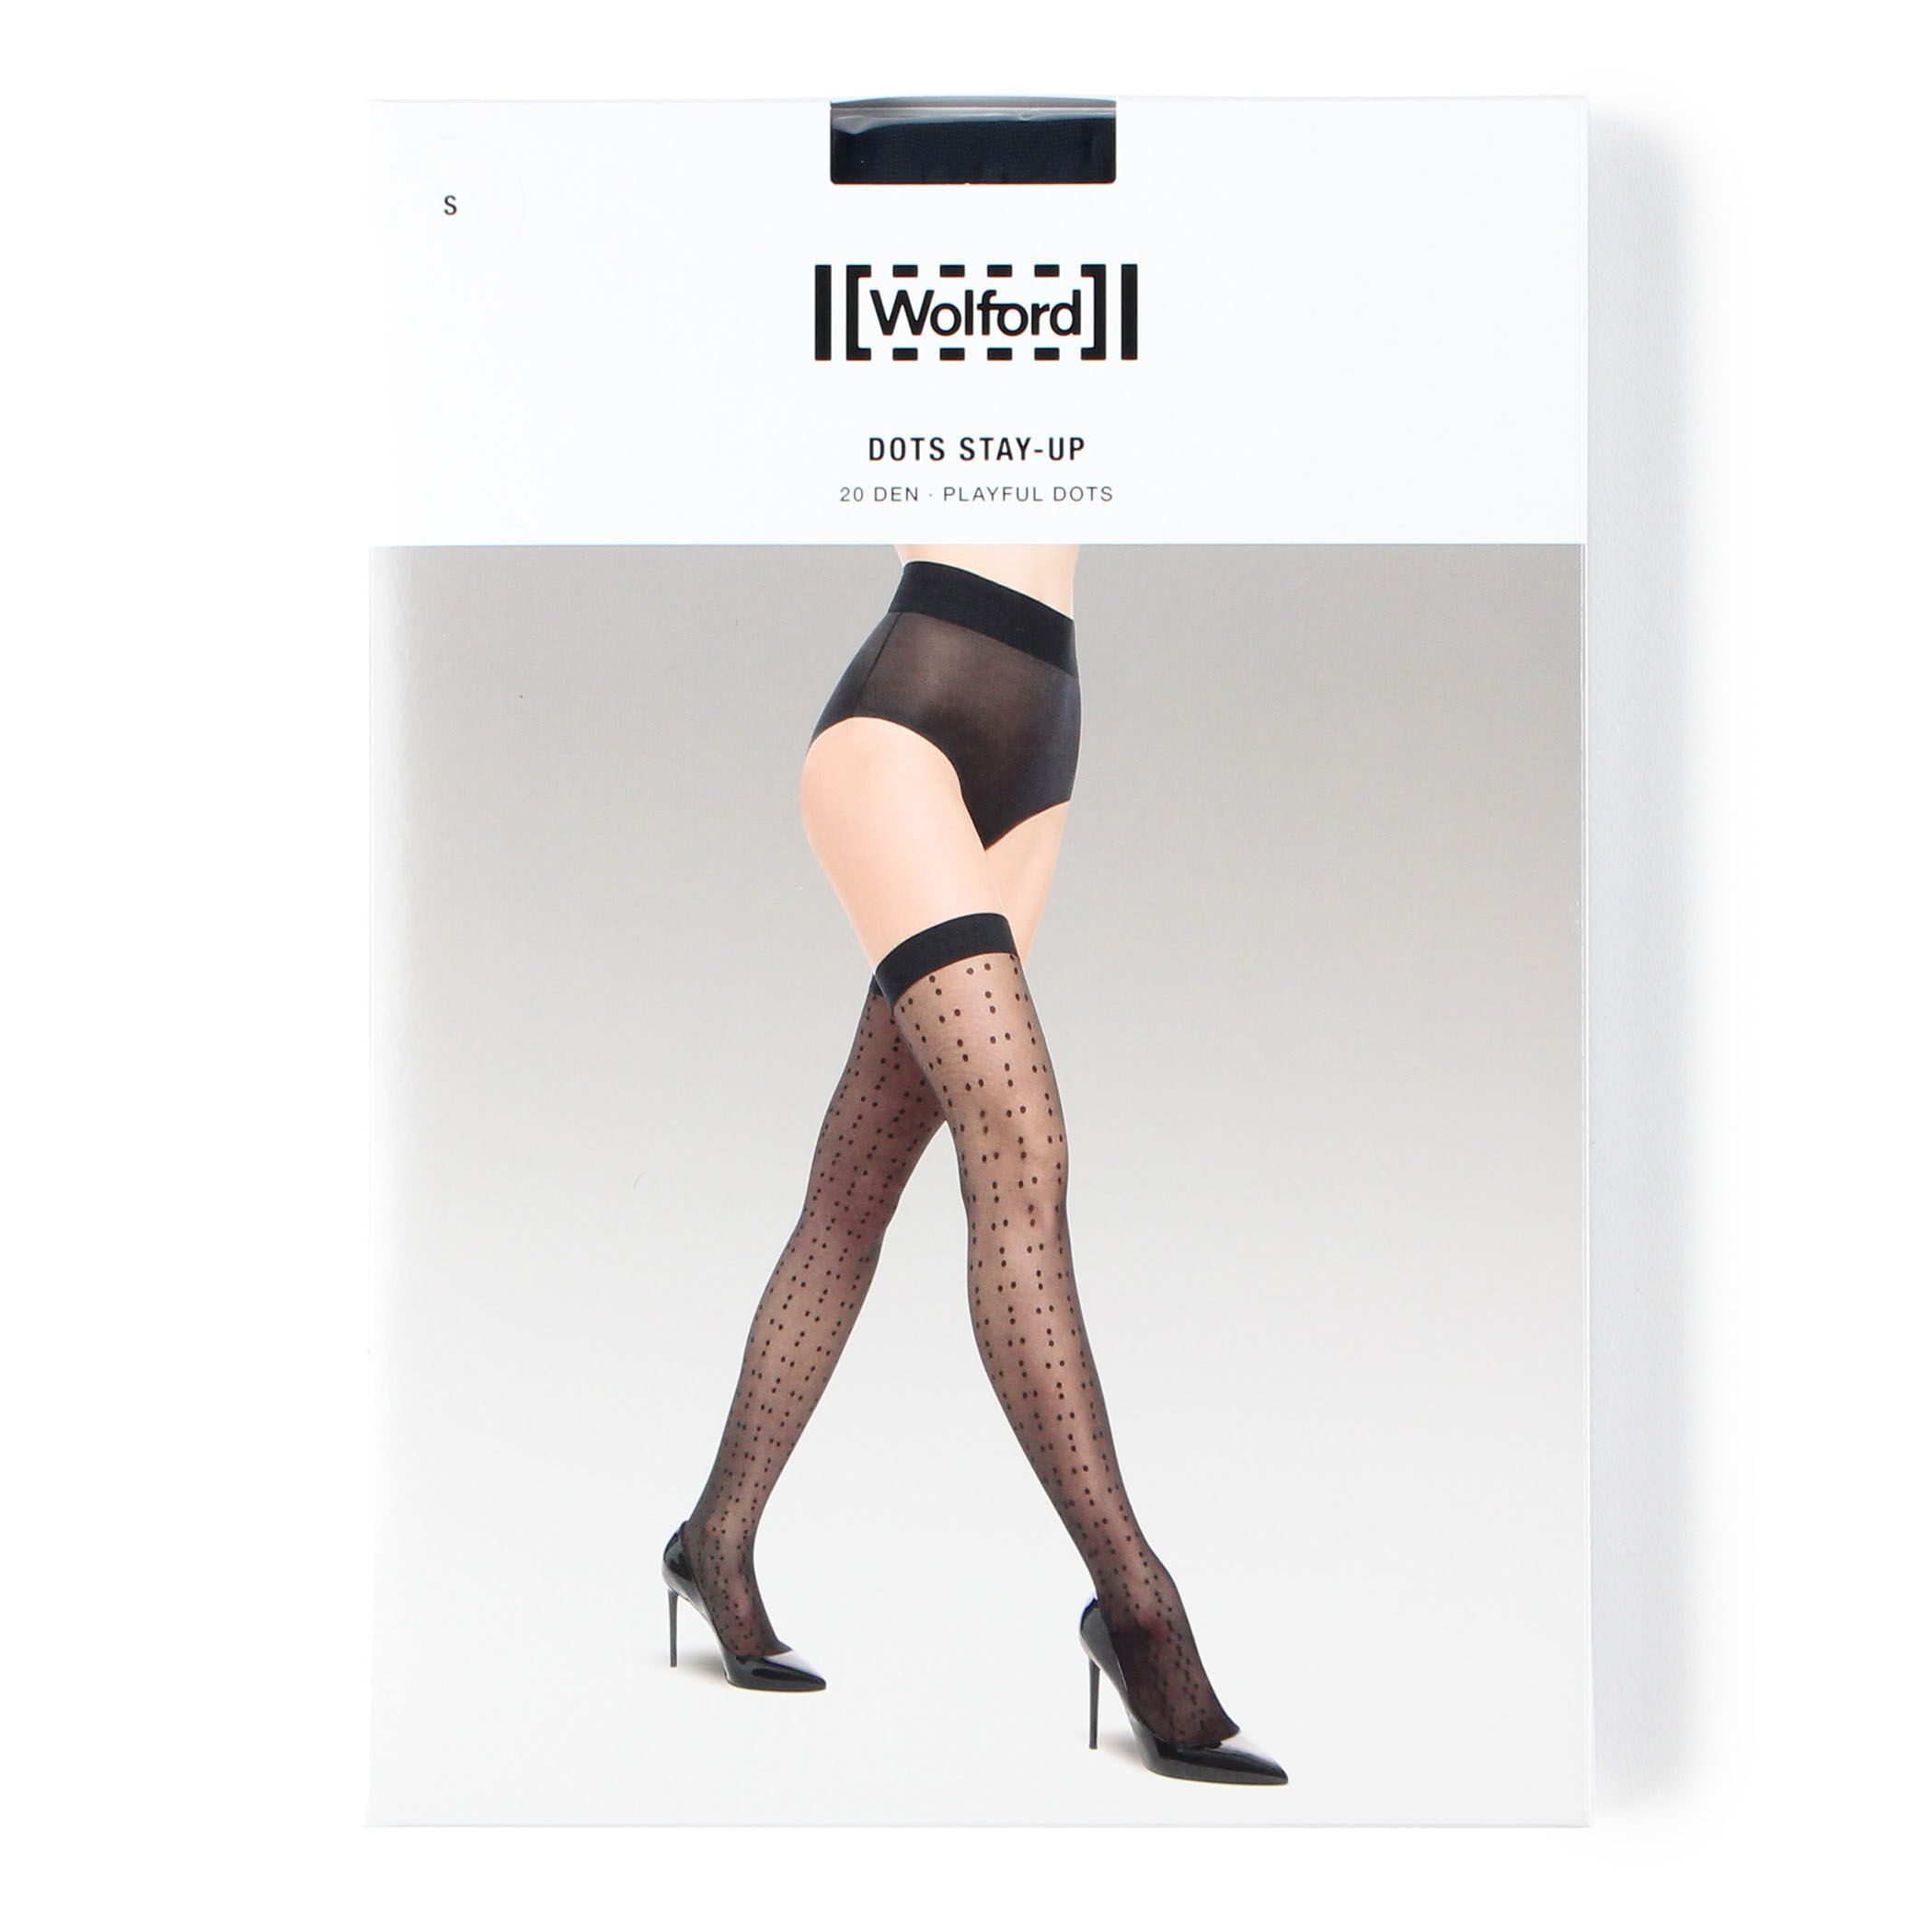 Wolford DOTS STAY UP タイツ｜トゥモローランド 公式通販